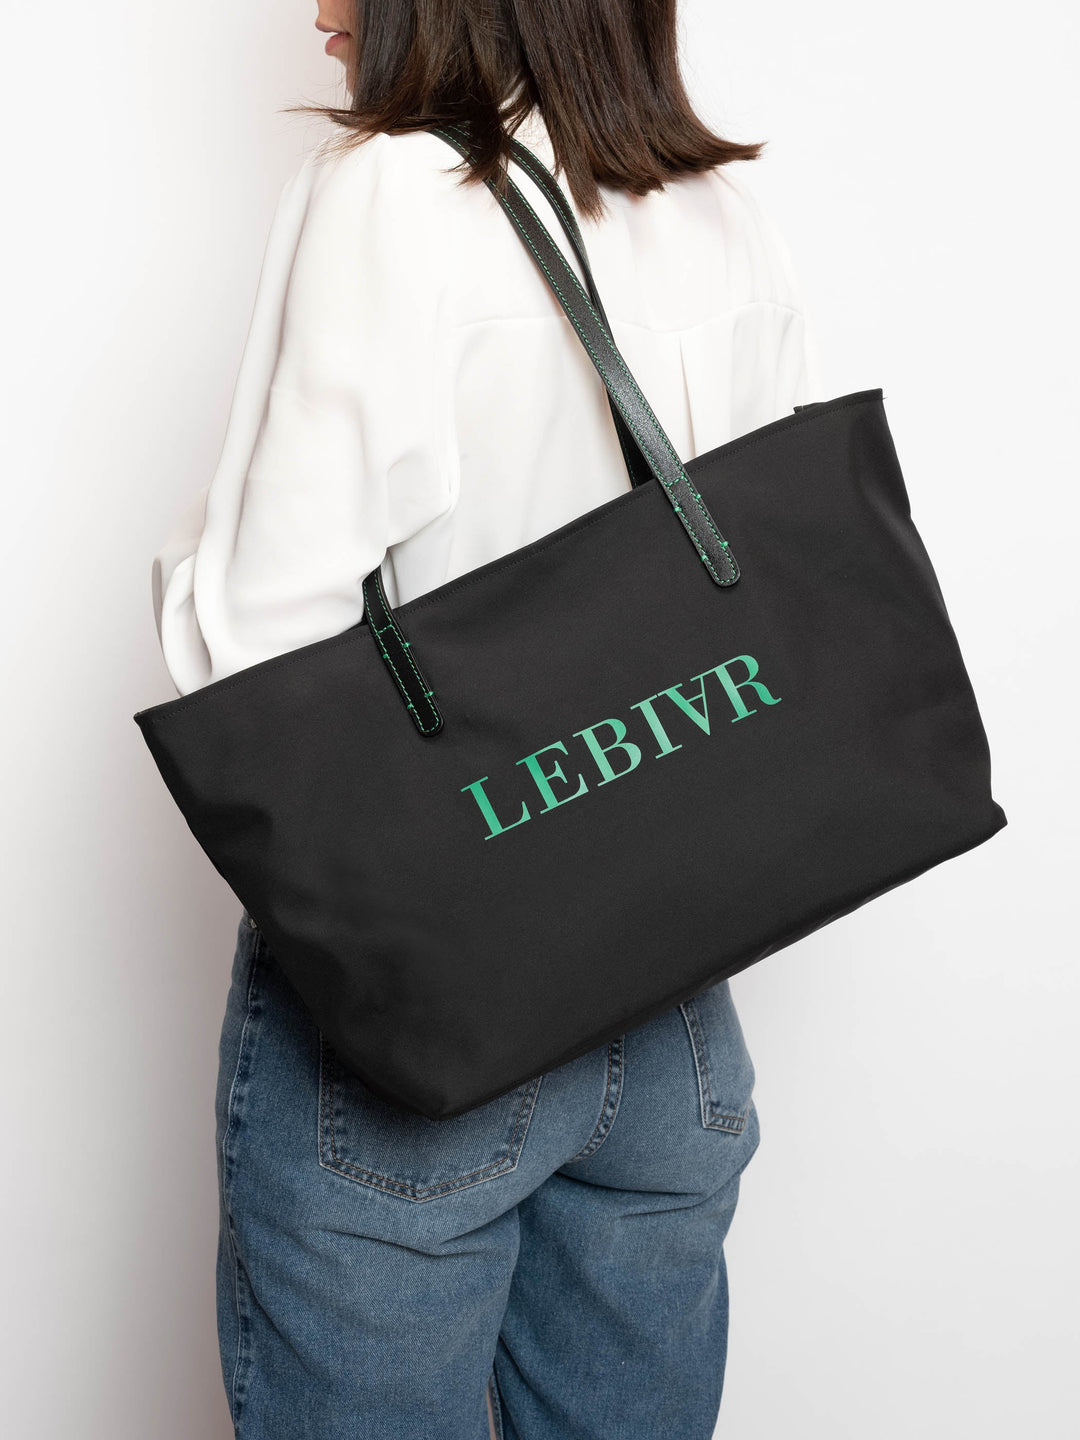 Woman carrying a black tote bag with LEBIVR text, wearing a white blouse and blue jeans